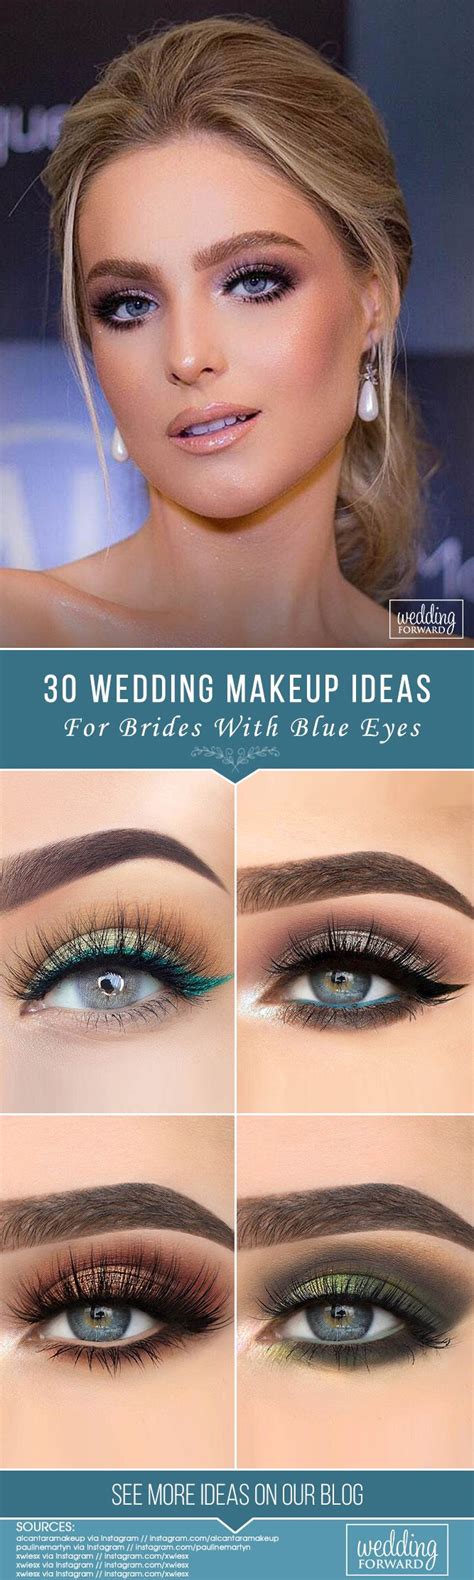 Wedding Makeup Ideas For Blue Eyes Looks Guide Wedding